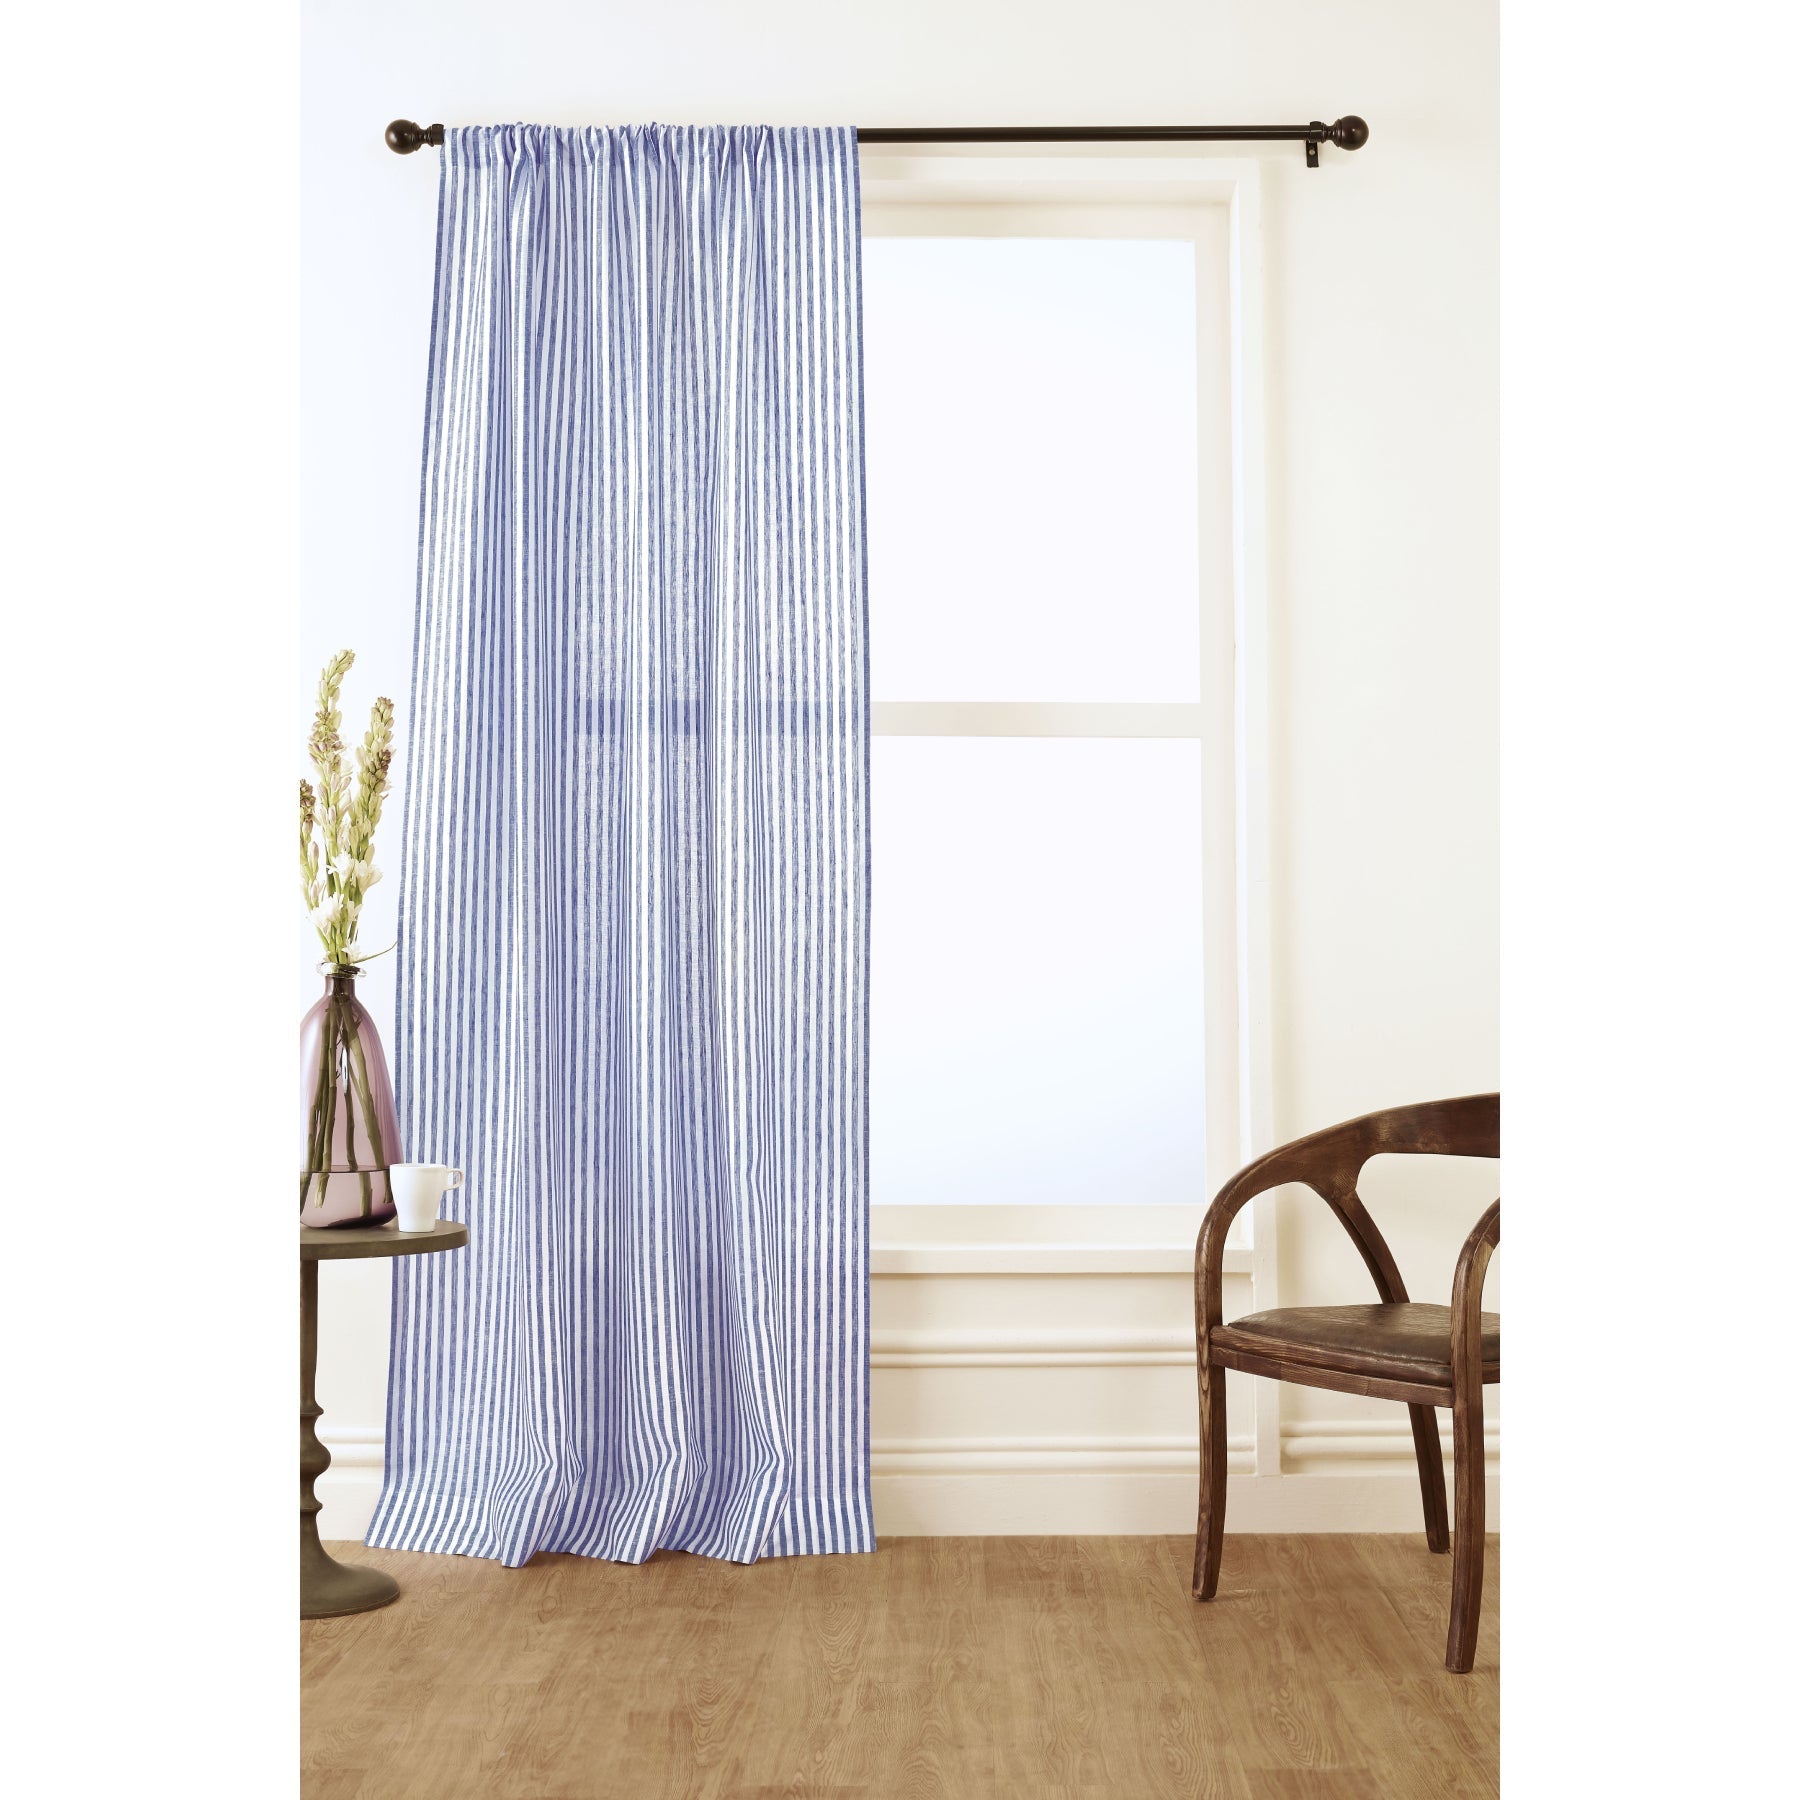 Solino Home Curtains | 100% Pure Linen | Handcrafted